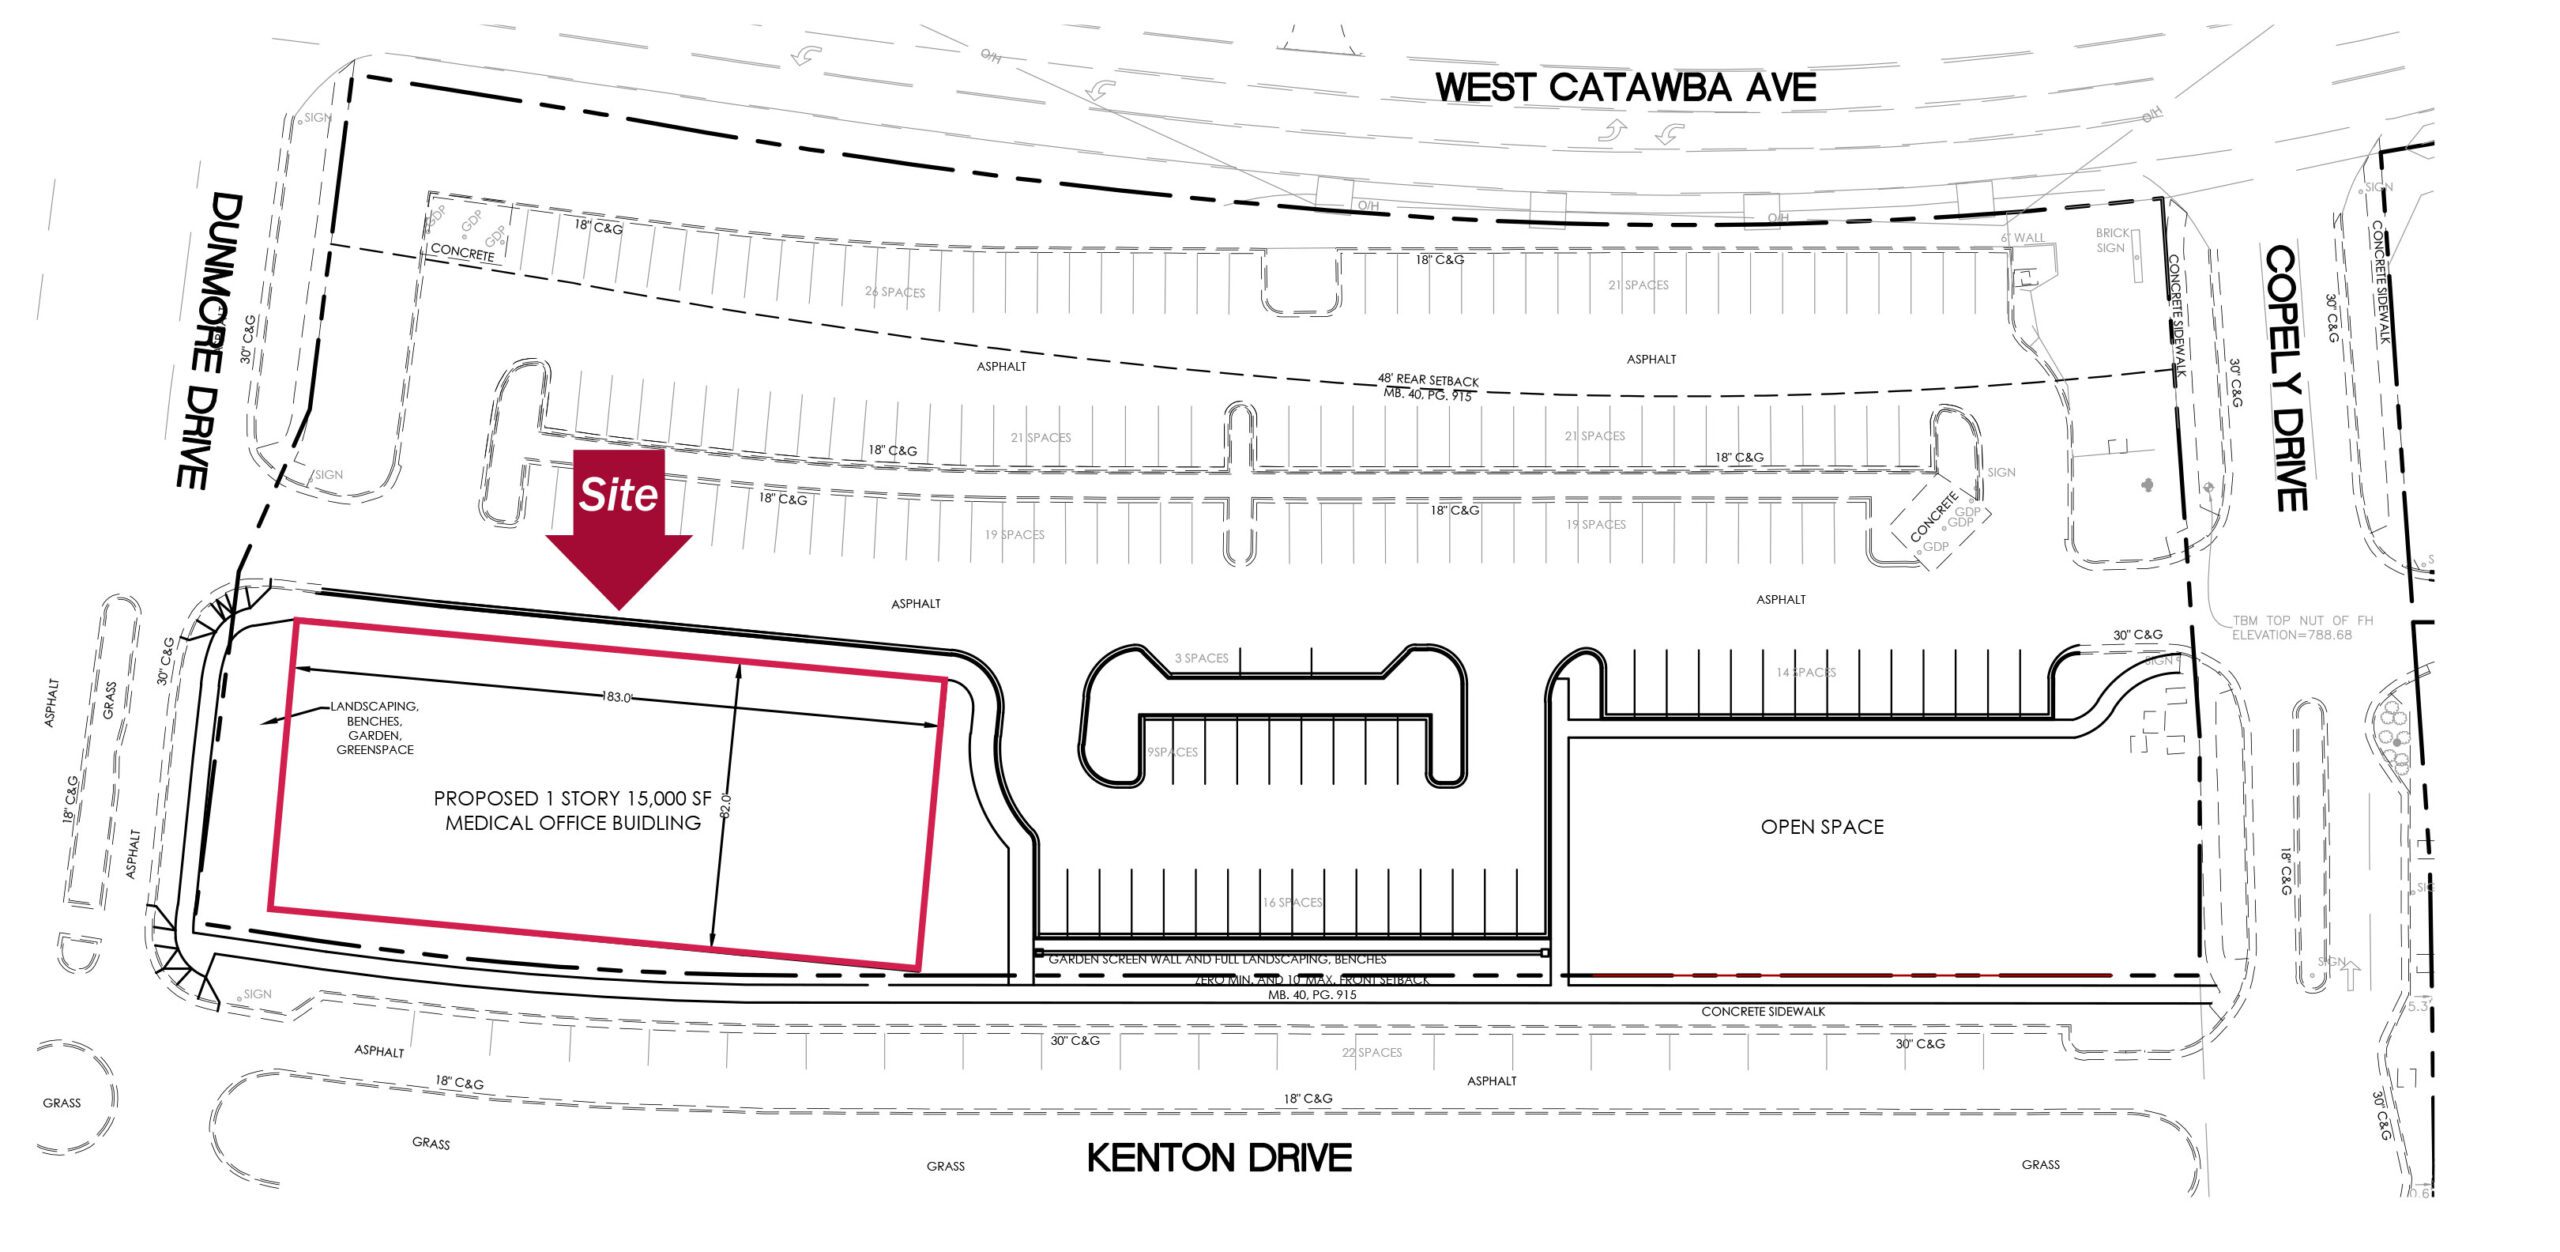 Site Plan 15,000 SF aerial with Parking